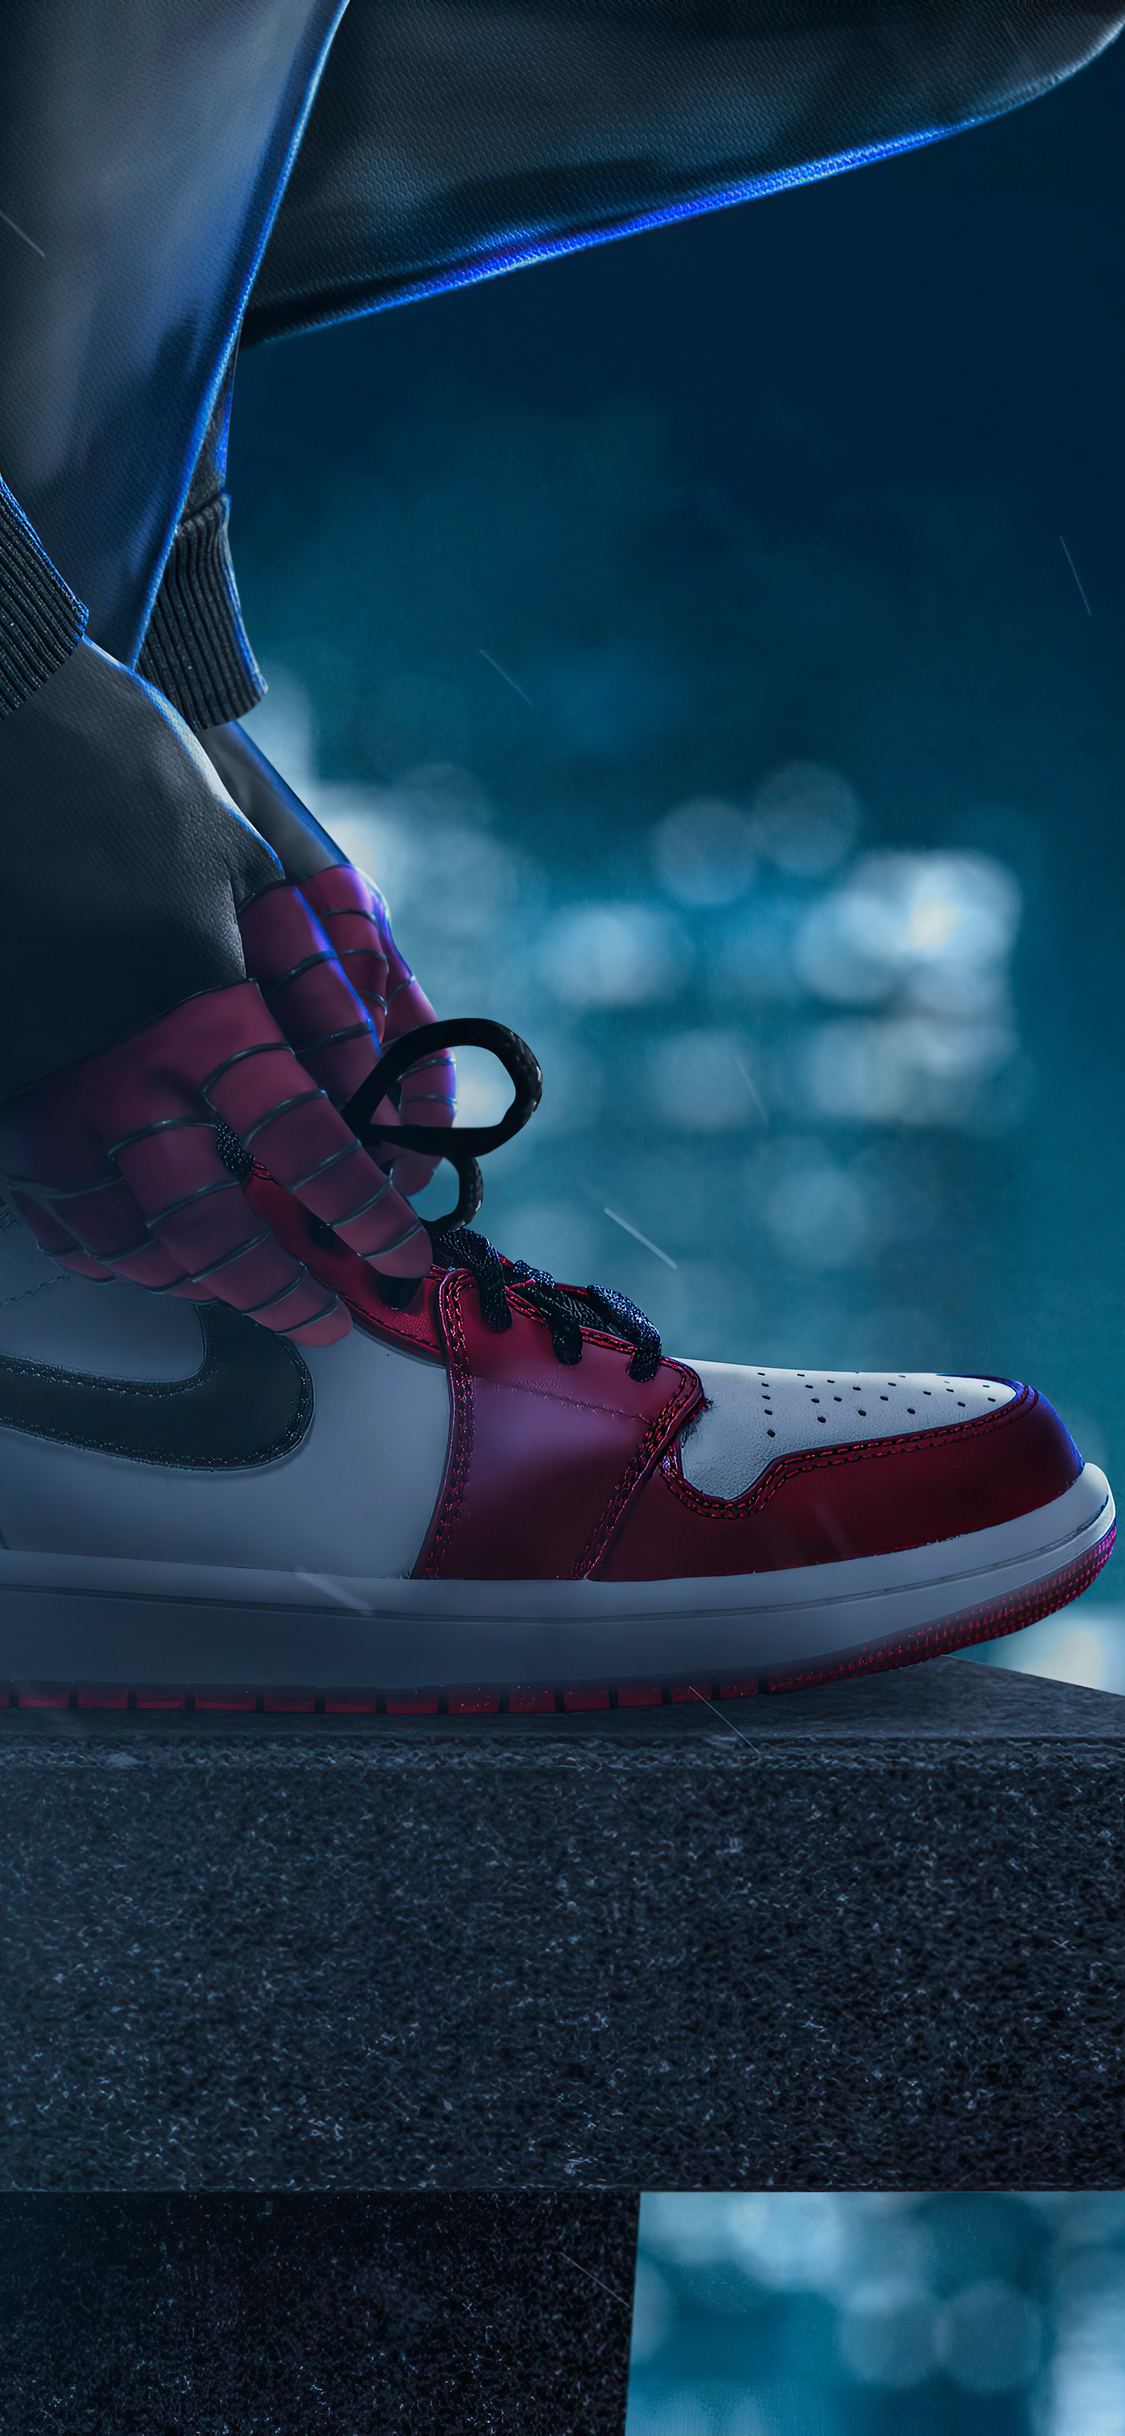 Air Jordan 1 Miles Morales iPhone XS, iPhone iPhone X HD 4k Wallpaper, Image, Background, Photo and Picture